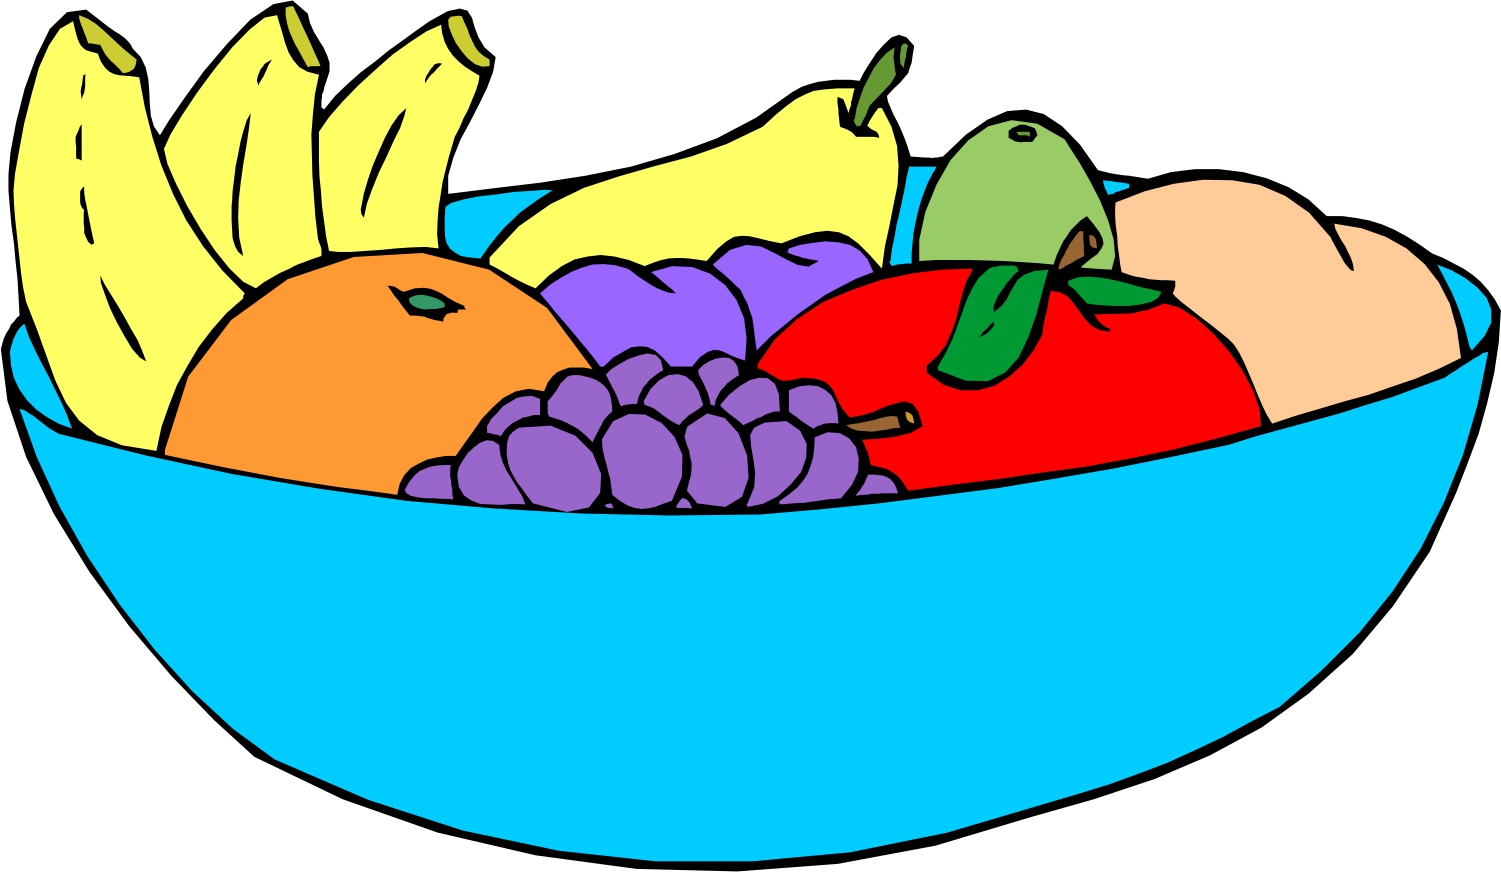 Fruit clipart #2, Download drawings